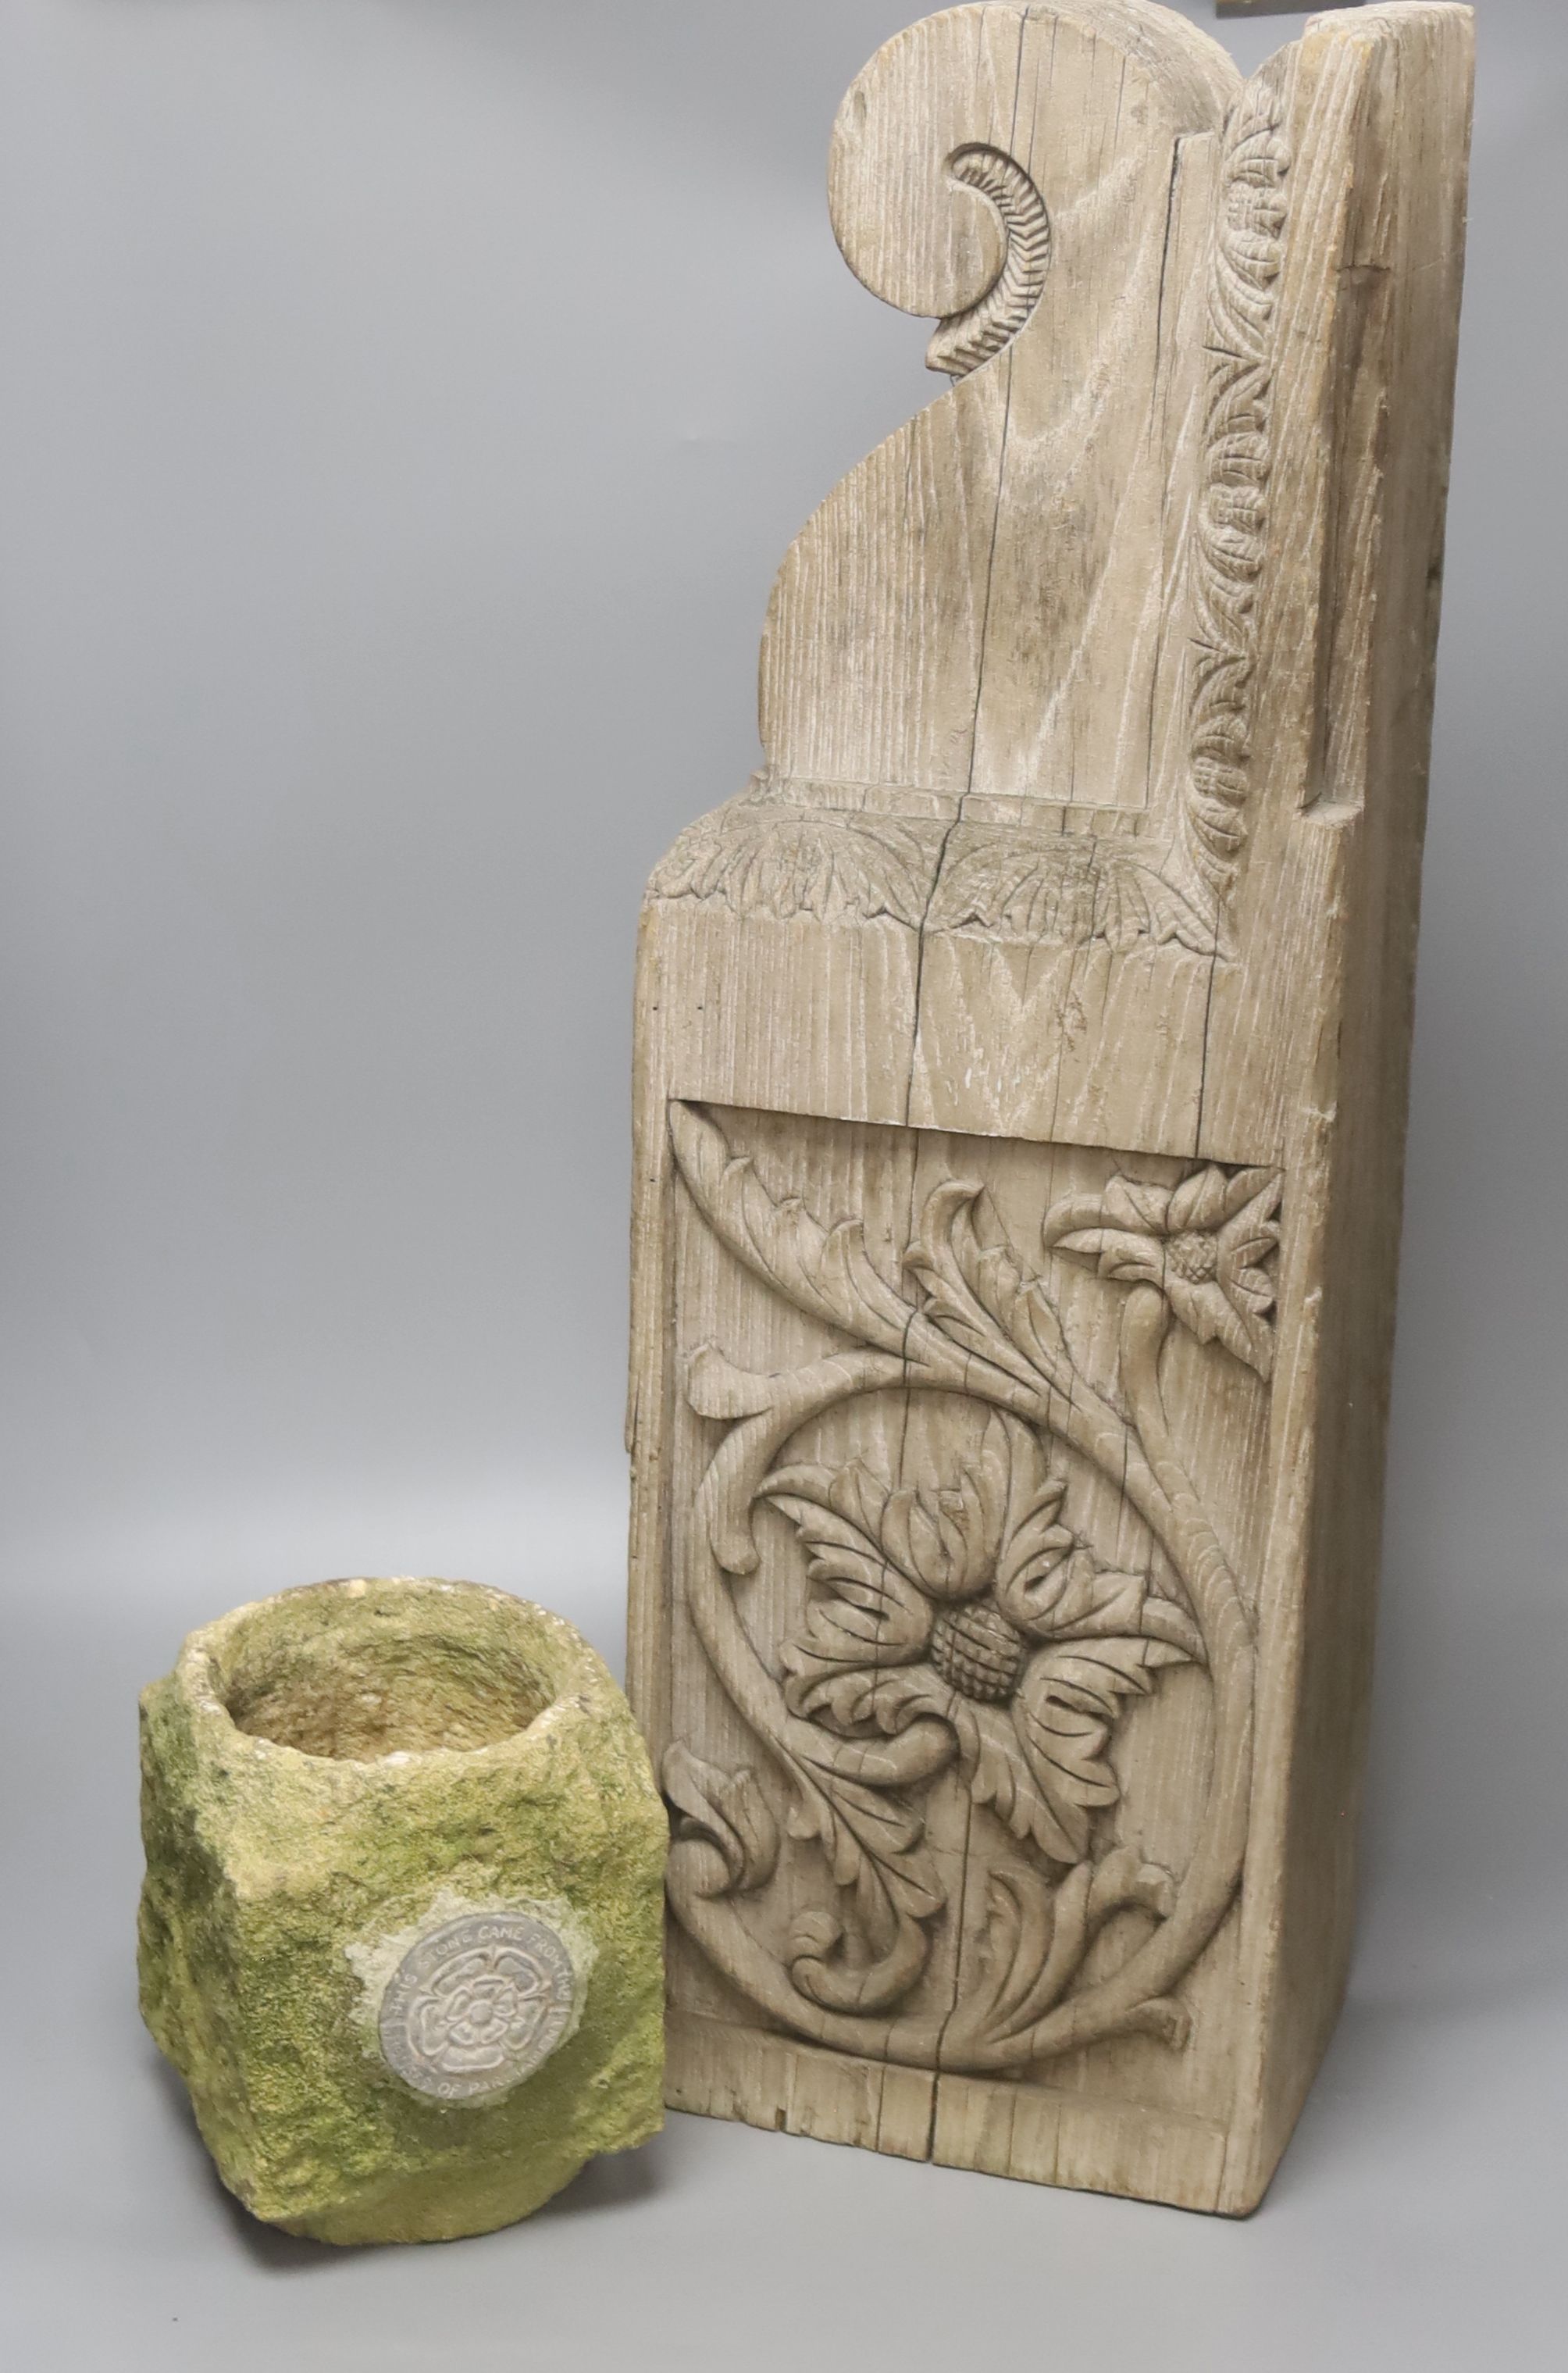 A sculpted stone pot labelled This Stone came from The Houses of Parliament, 15 x 15cm 19cm high, a teak architectural support, 18th century